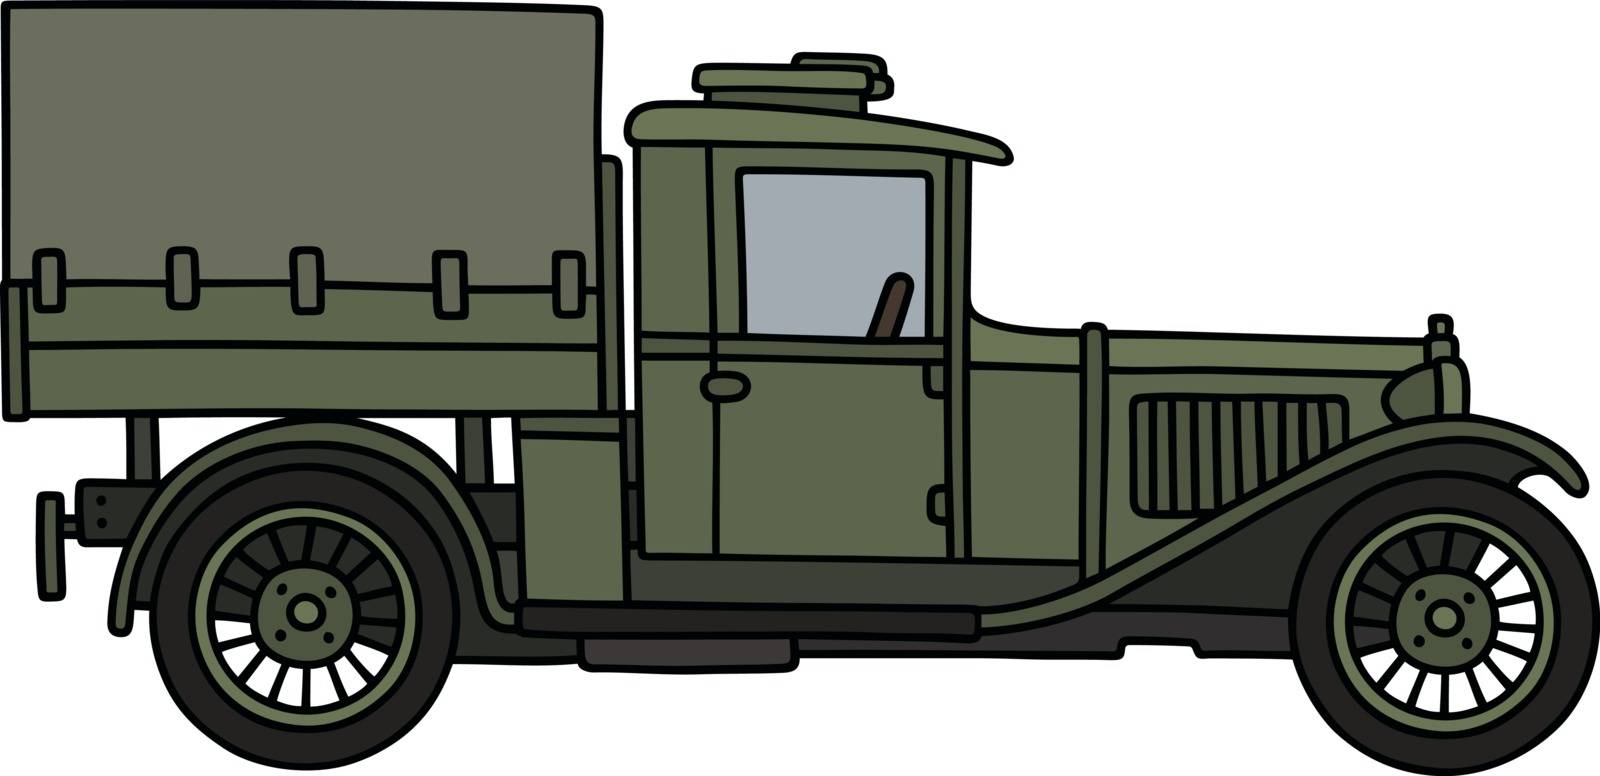 The vintage military truck by vostal